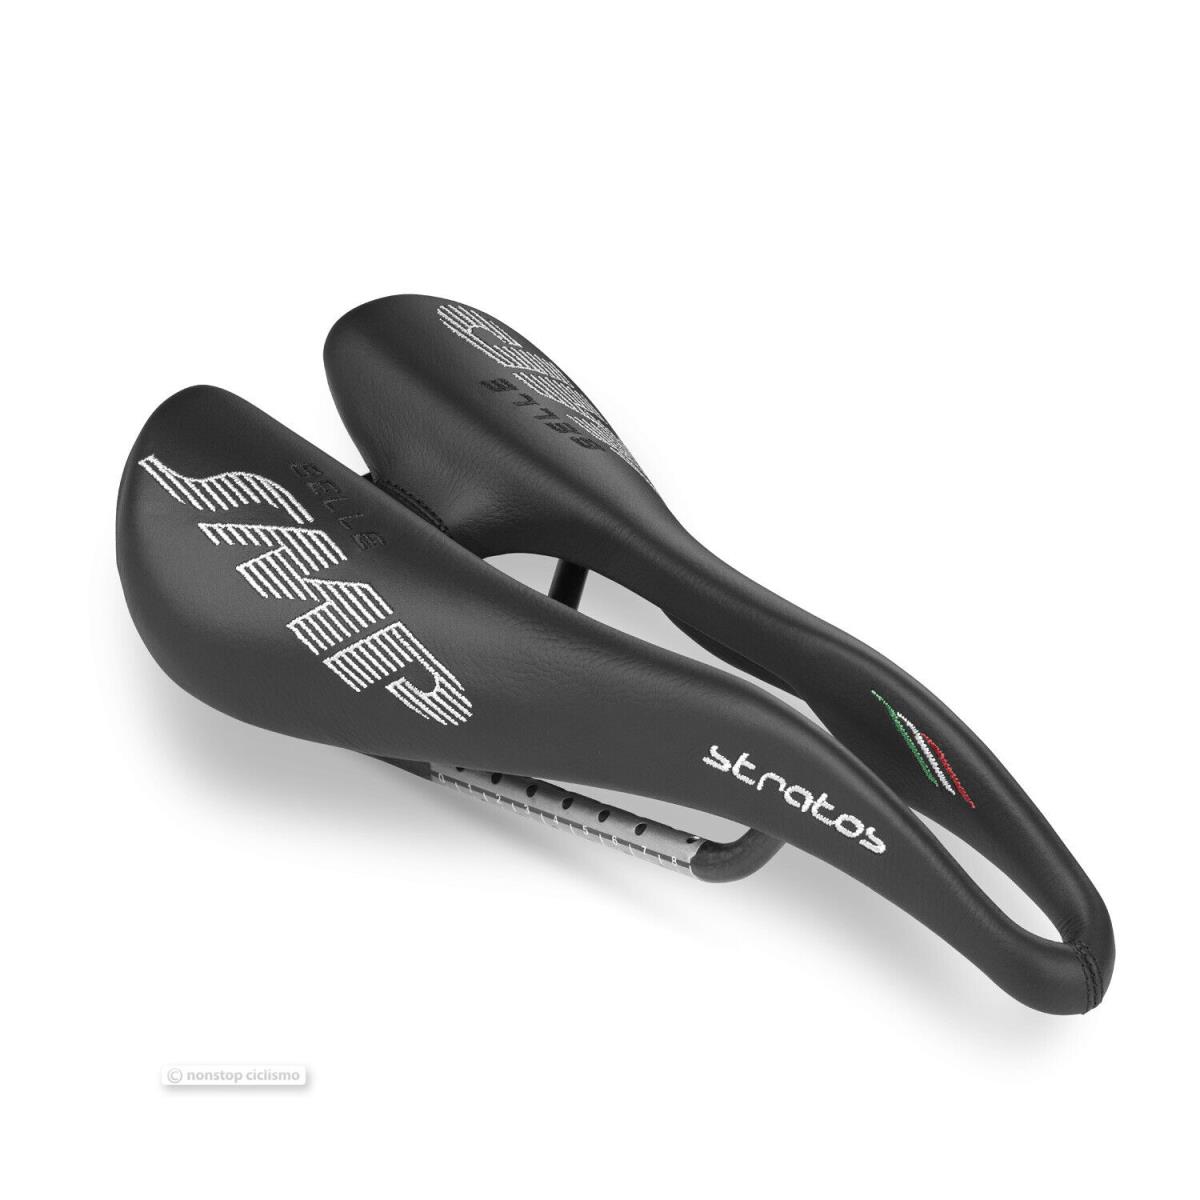 Selle Smp Stratos Carbon Saddle : Black - Made IN Italy